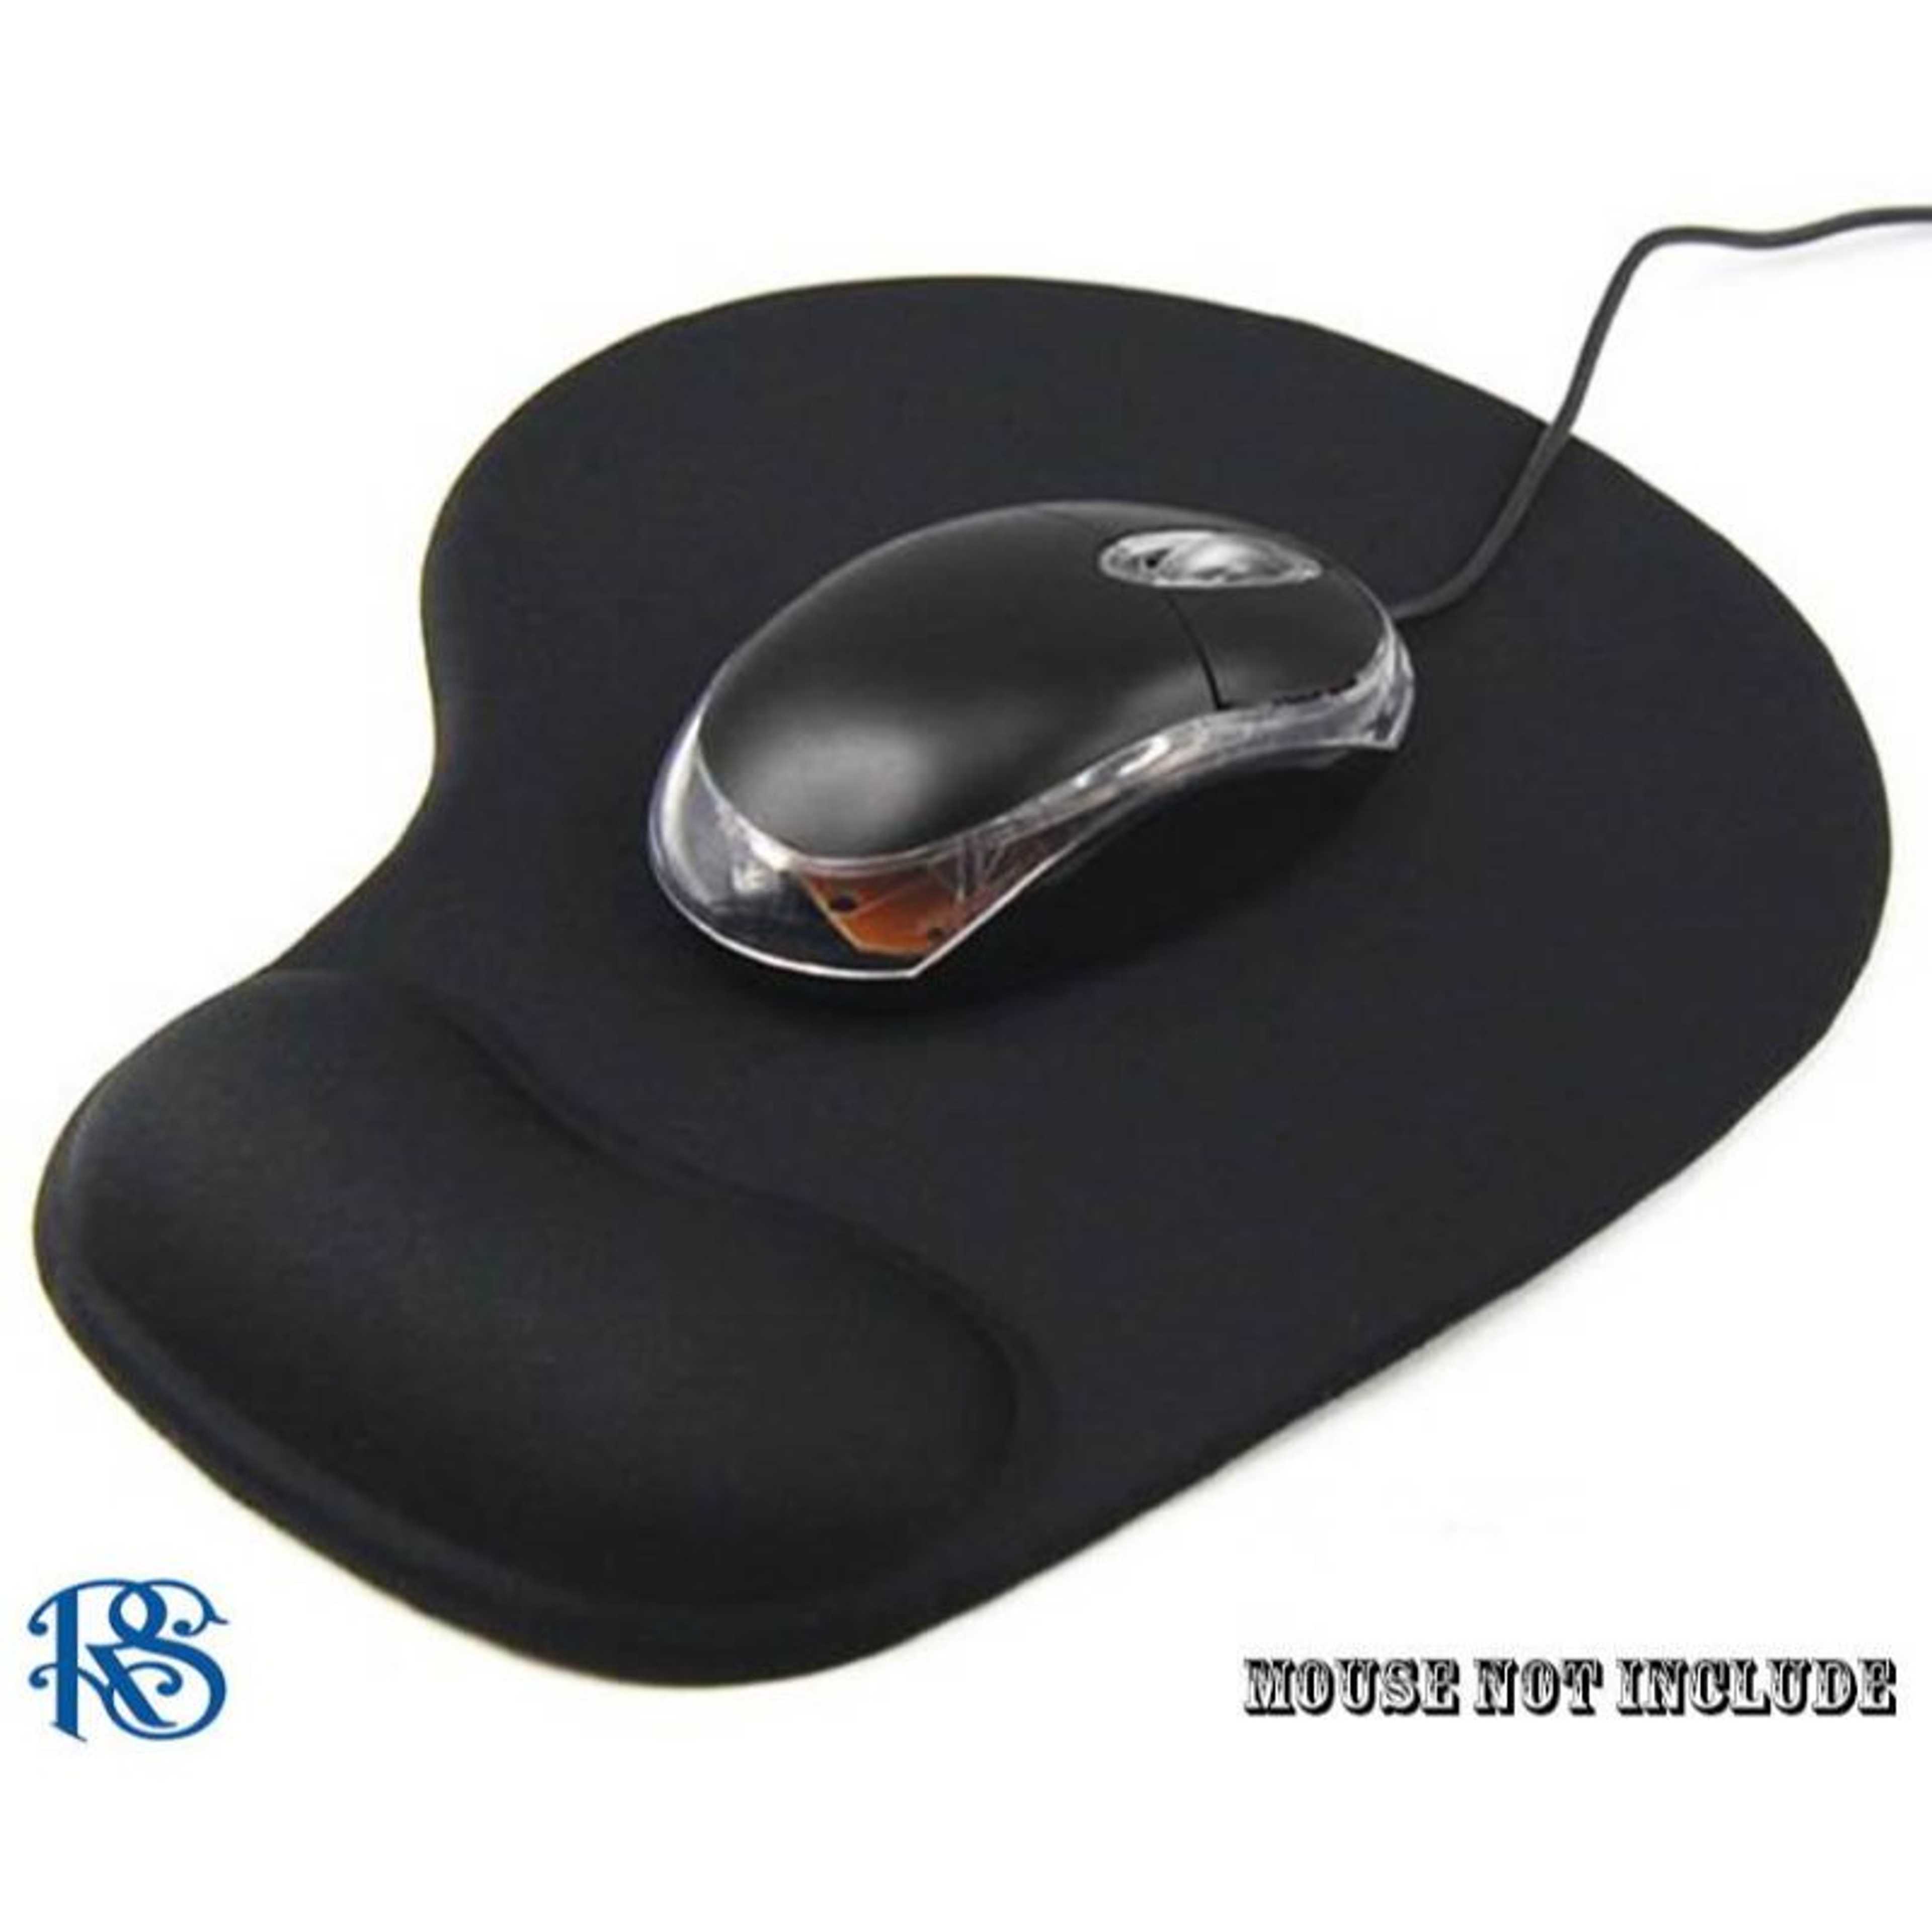 Premium Mouse Pad with Wrist Rest Protect Your Wrists and De-Clutter Your Desk - Black